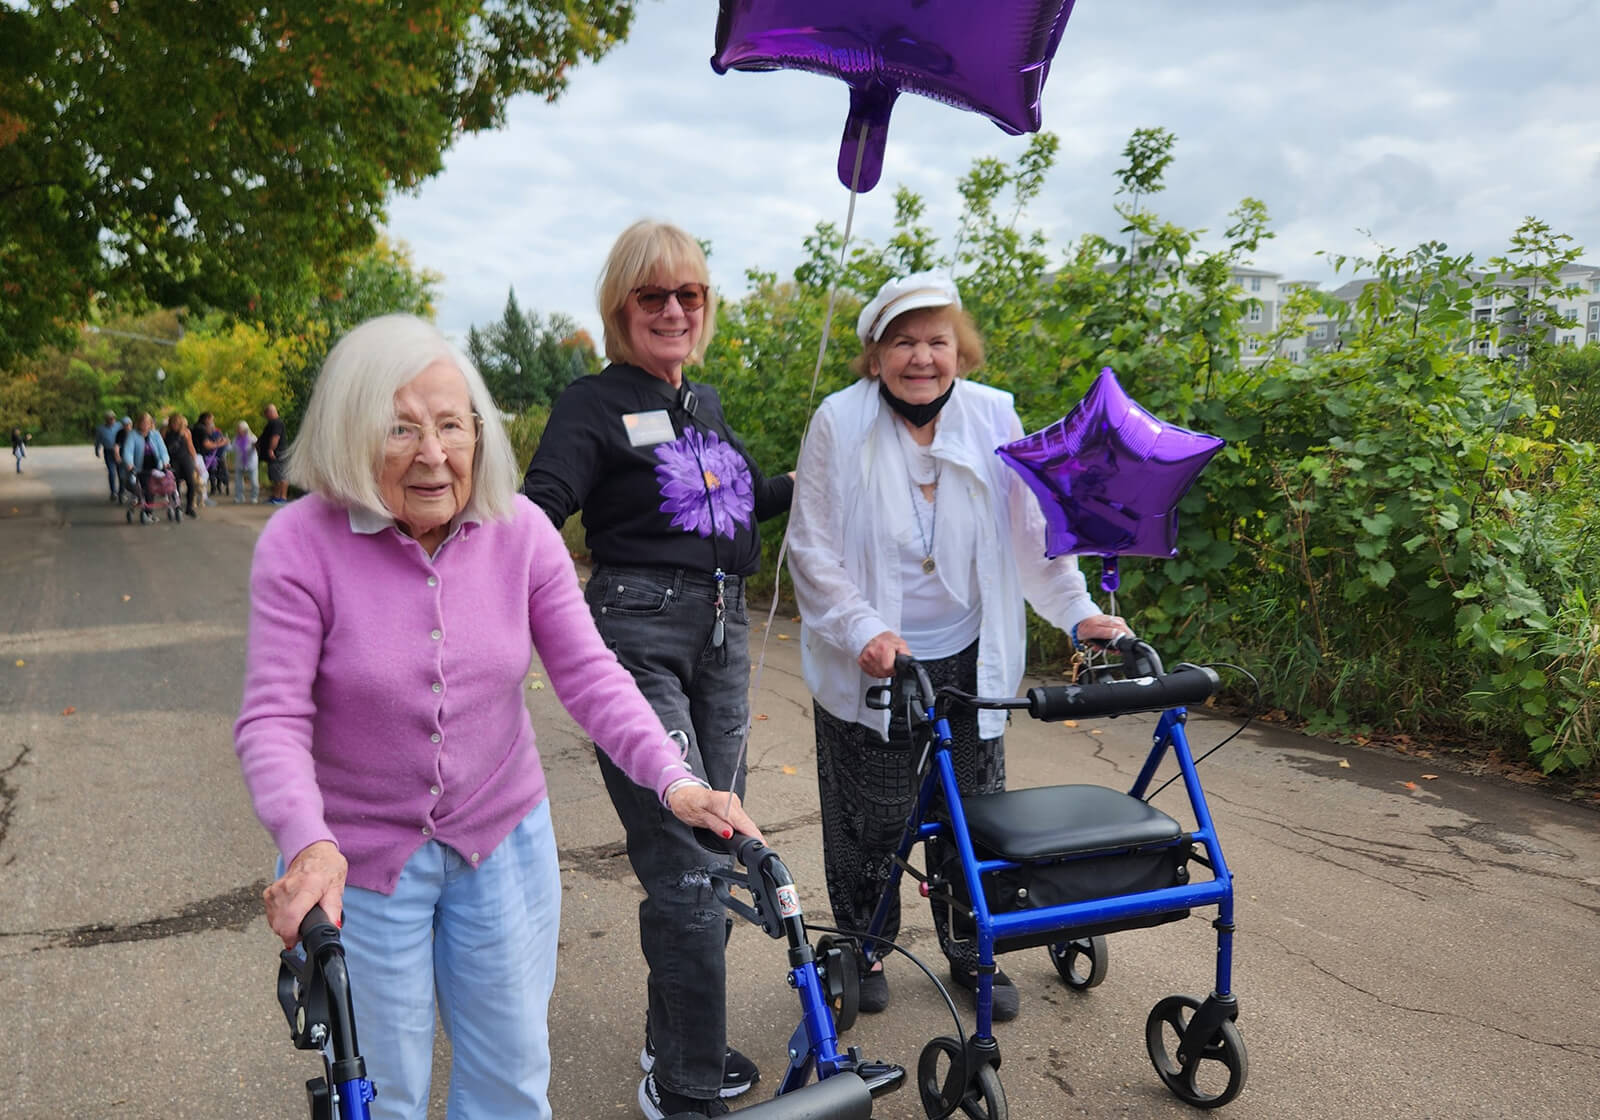 Residents and staff from The Waters of Excelsior participating in a memory walk, showing support for Alzheimer's awareness and research.